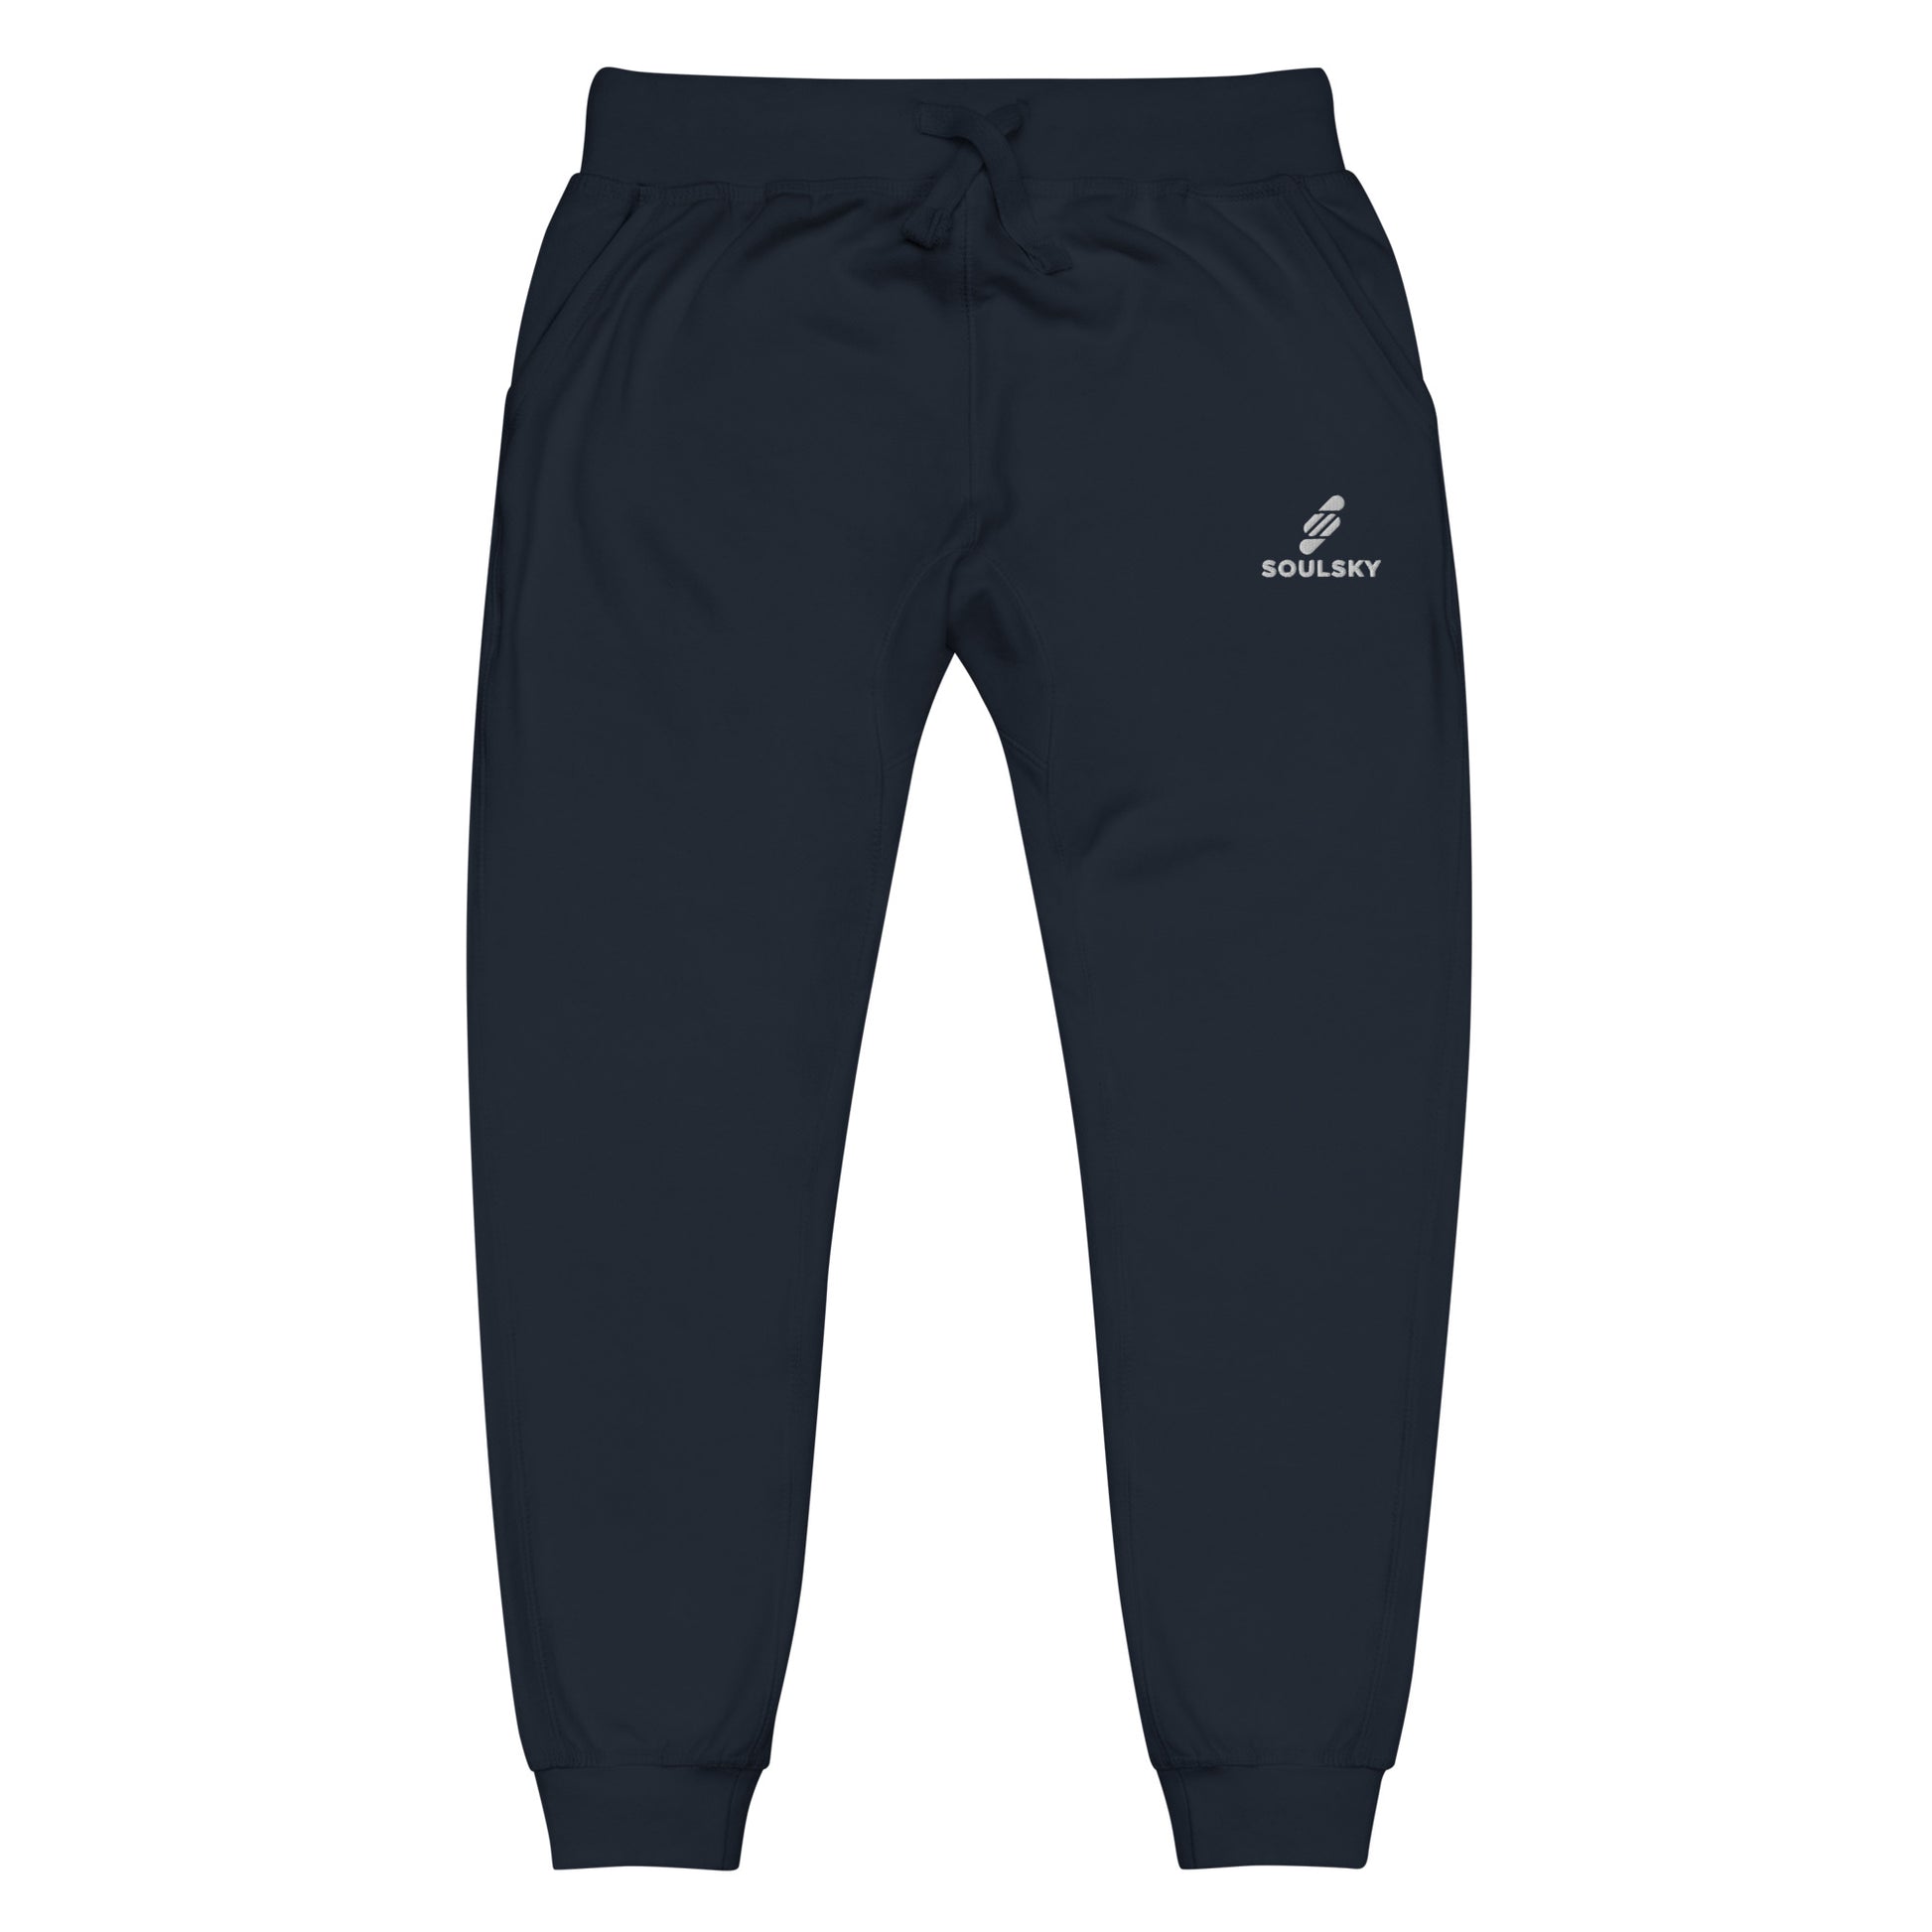 Navy blue unisex joggers with white embroidered logo on left thigh that says "SOULSKY".